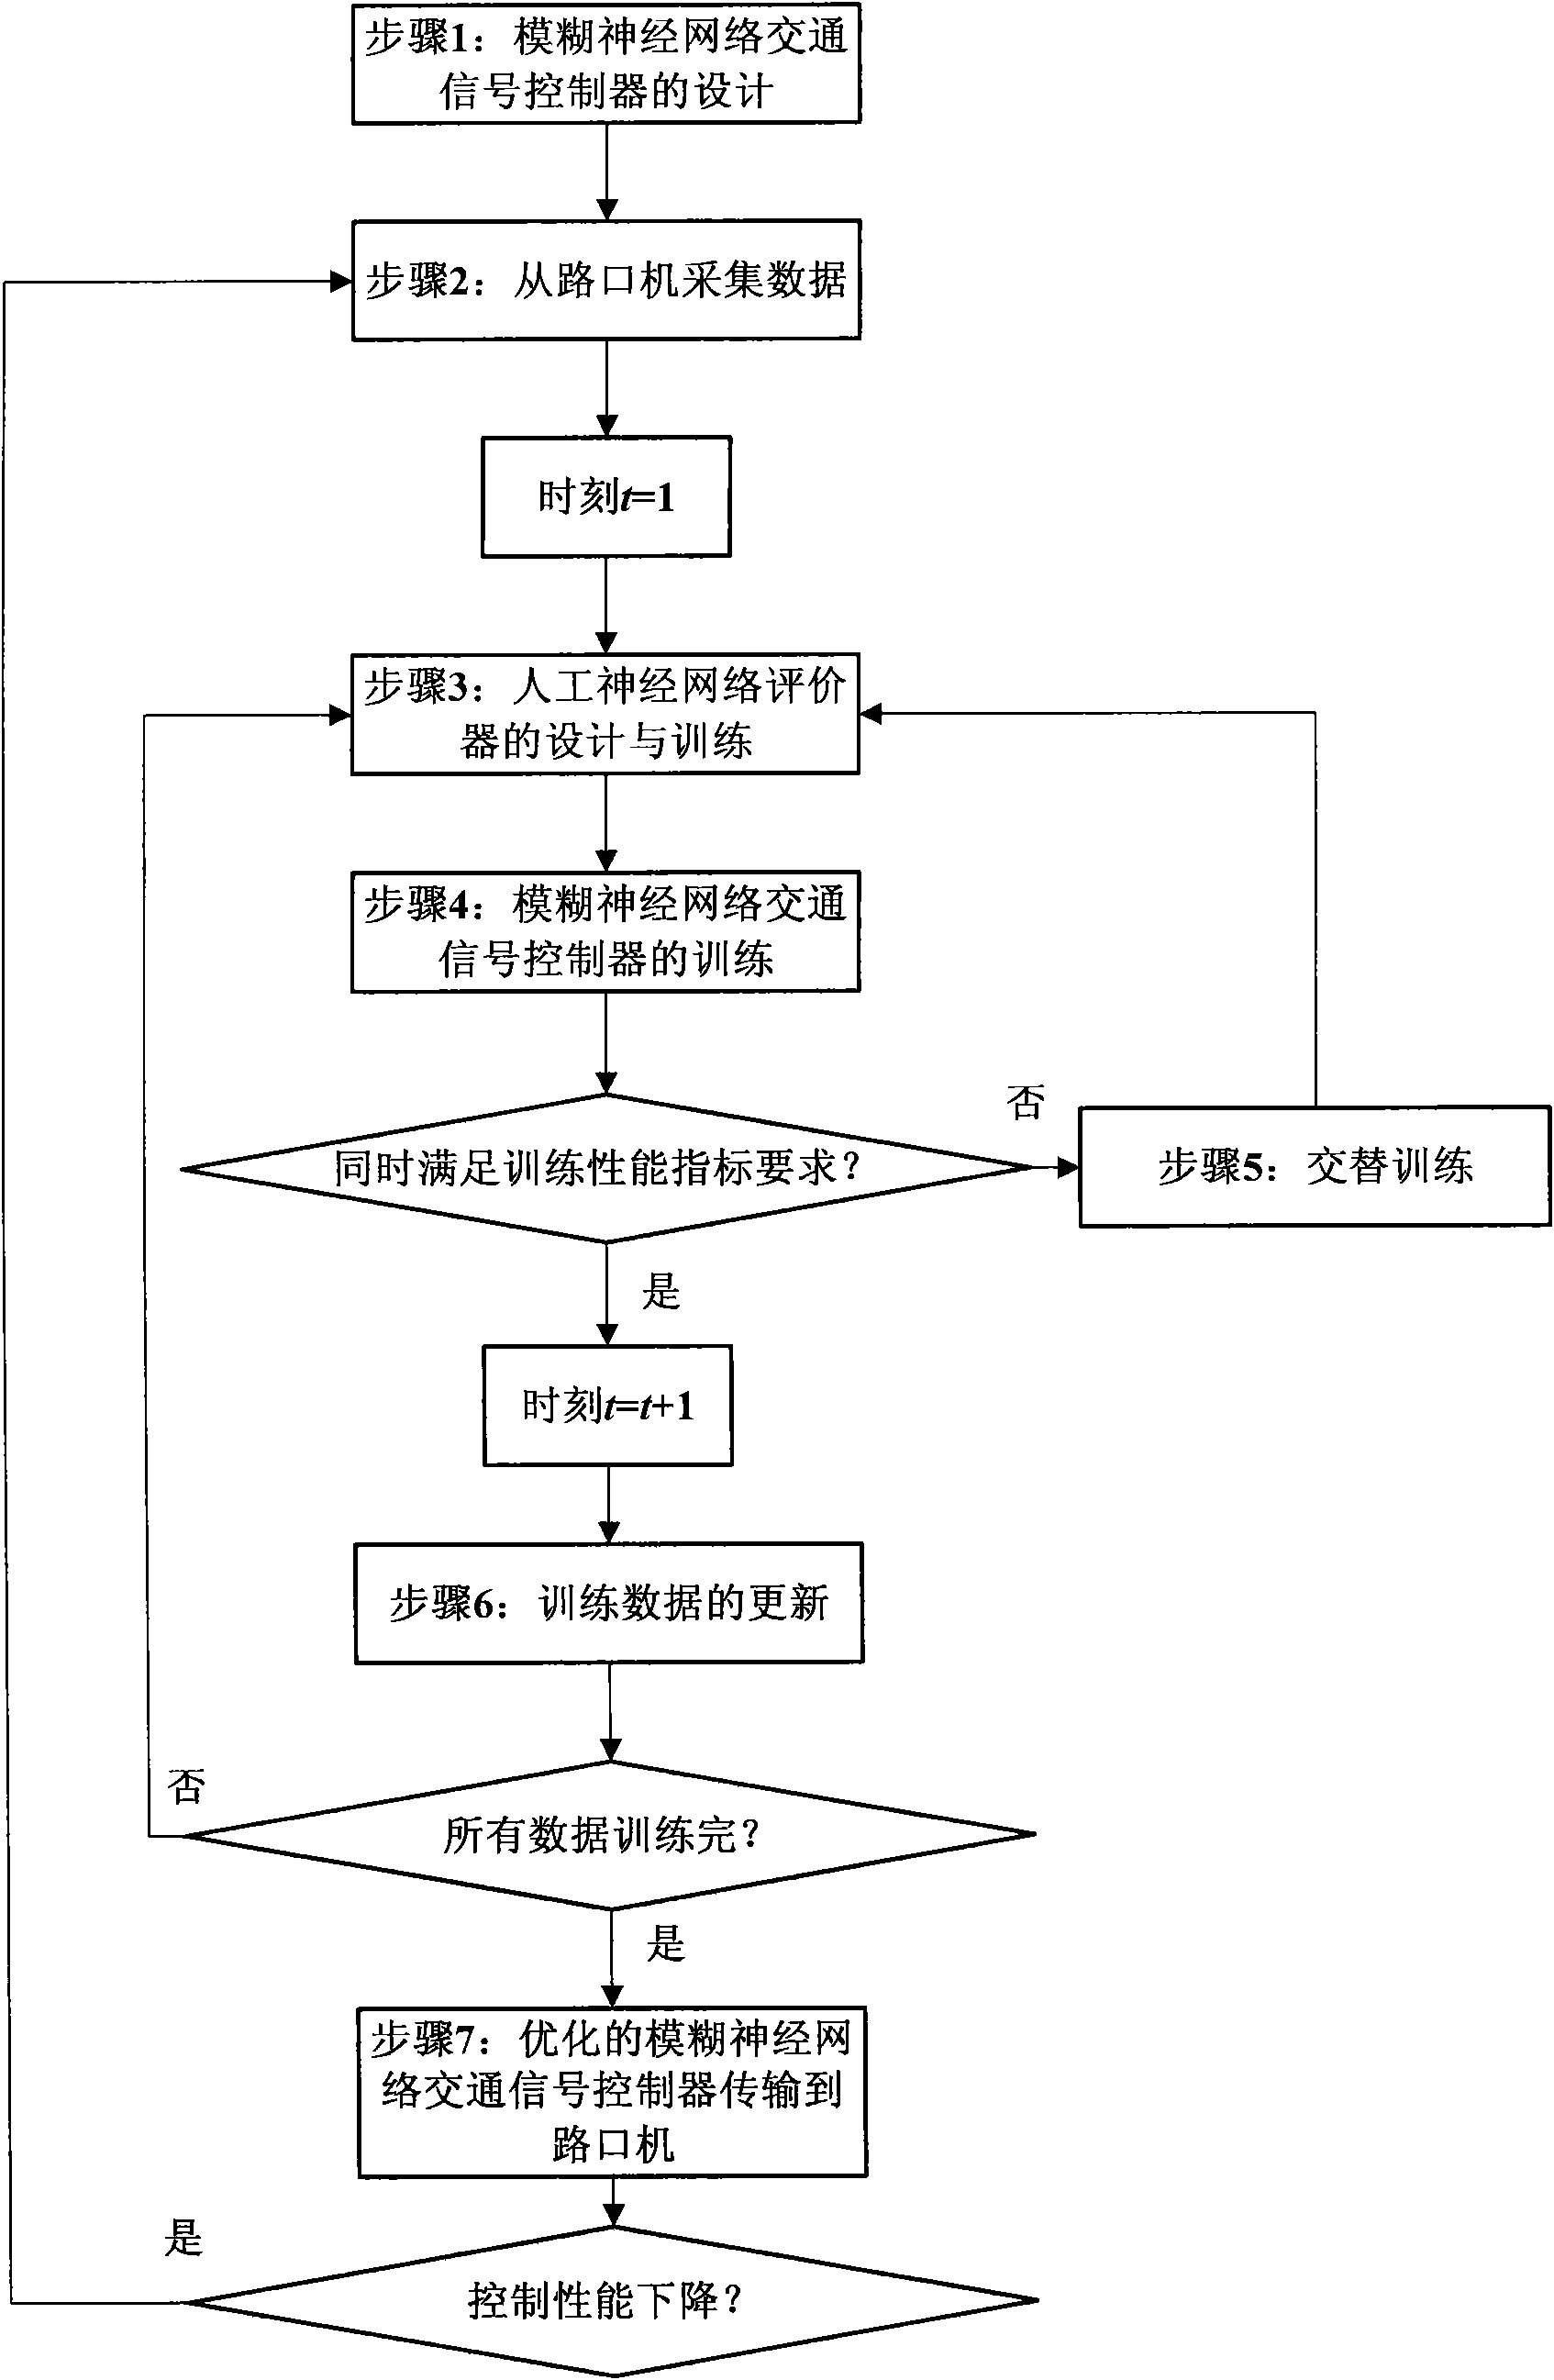 Optimized control method for traffic signals at road junction